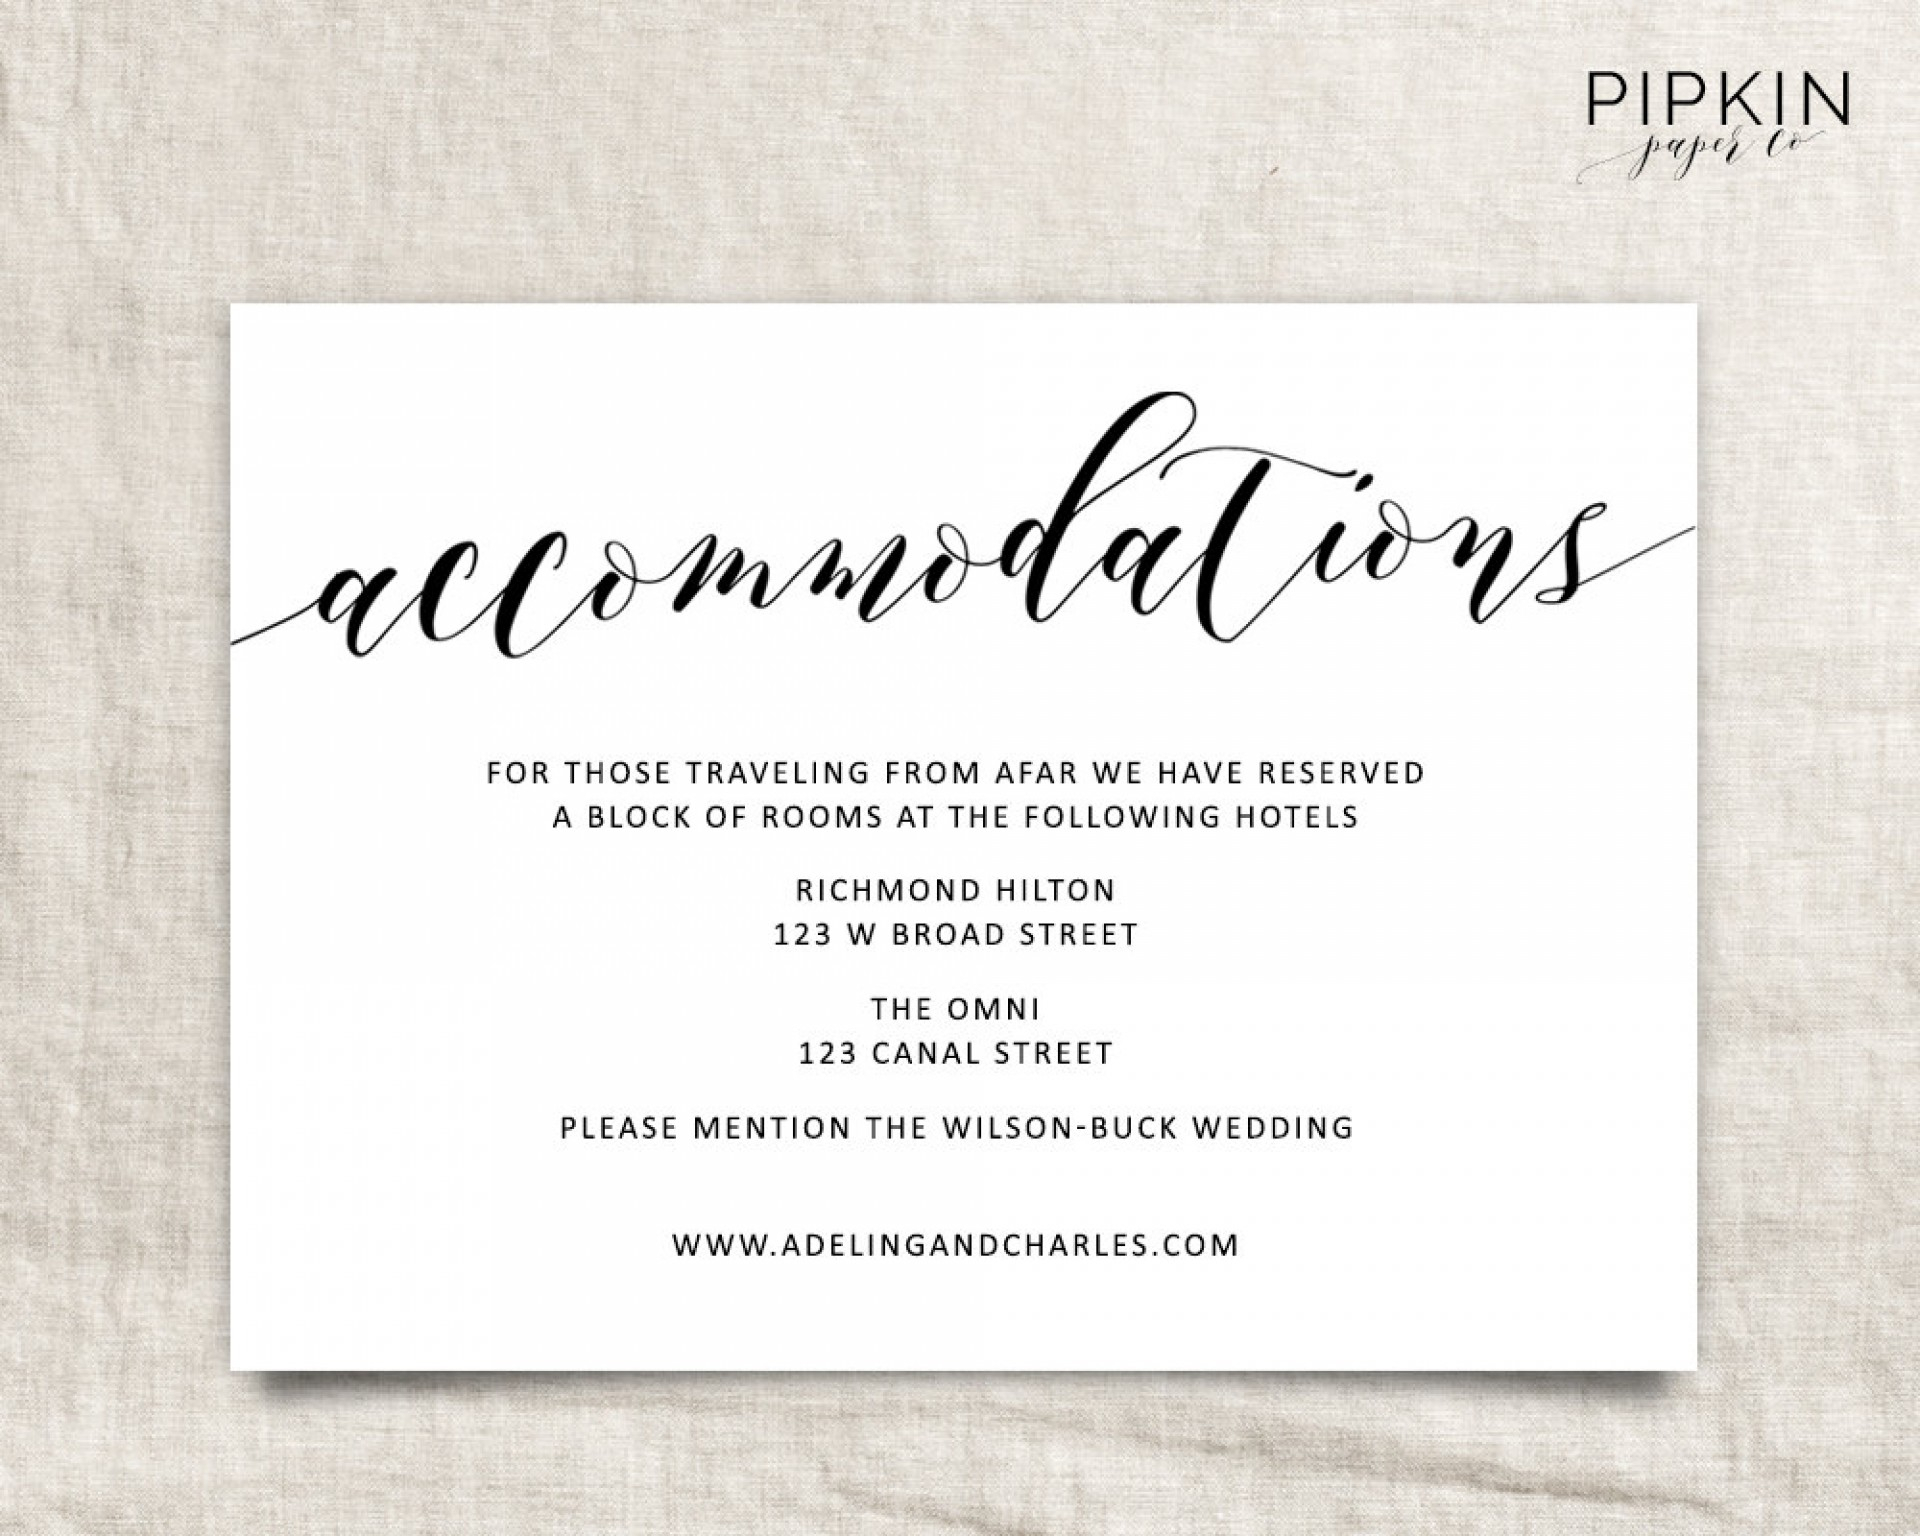 005 Free Wedding Accommodation Card Template Ideas Top Hotel Pertaining To Wedding Hotel Information Card Template